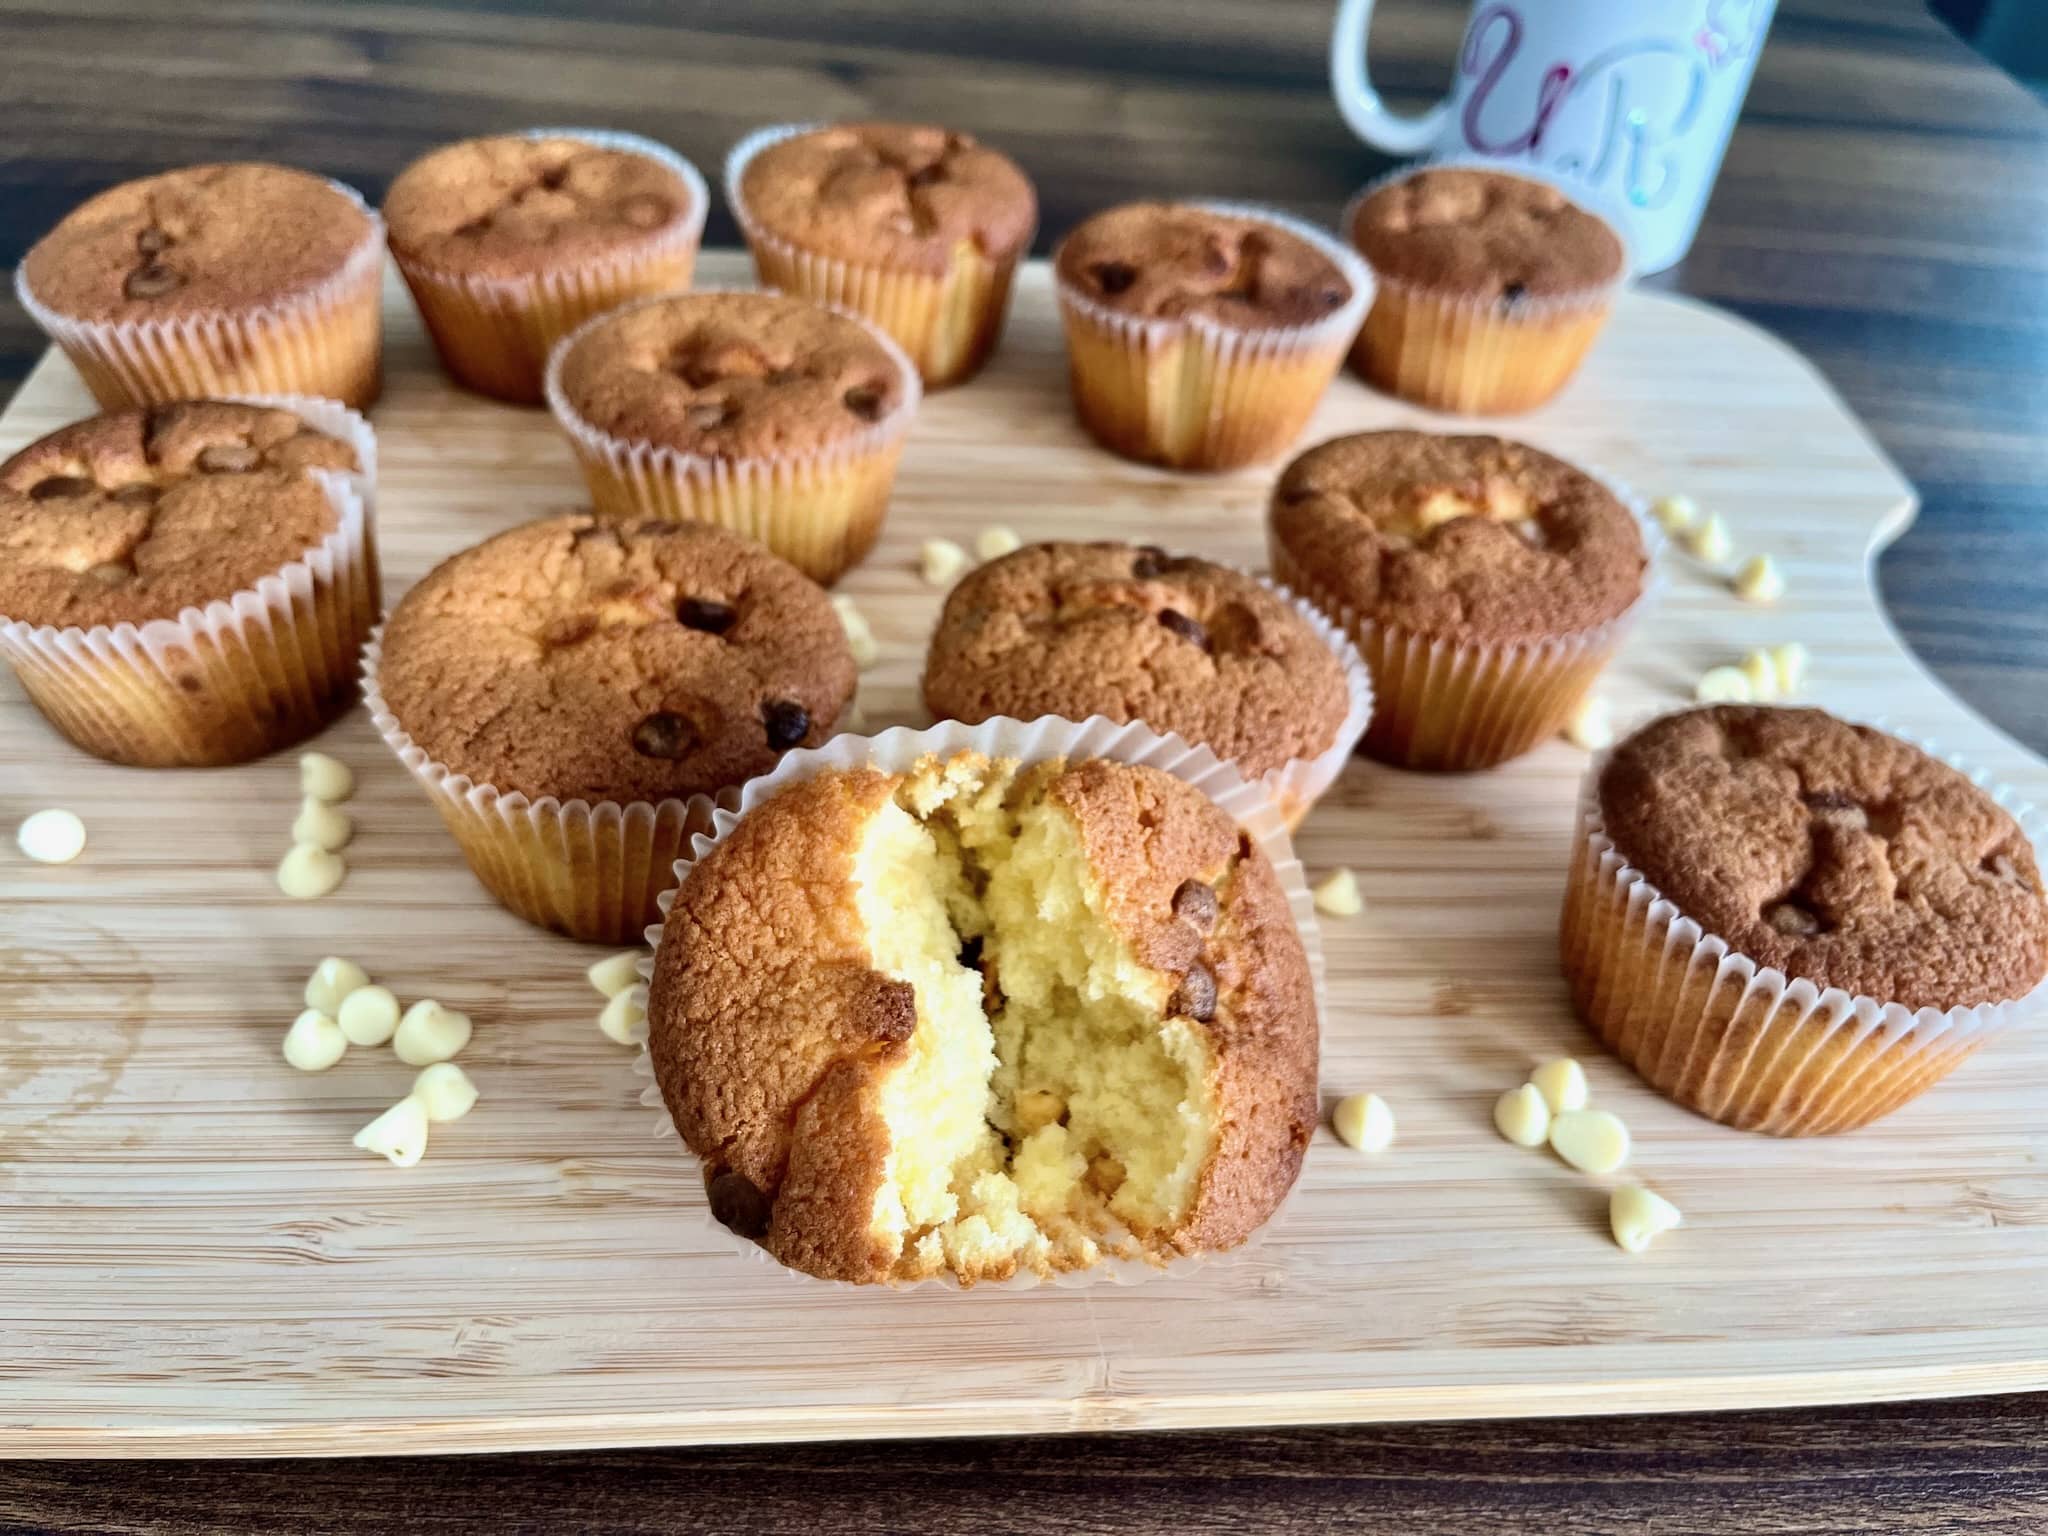 Muffins on a chopping board